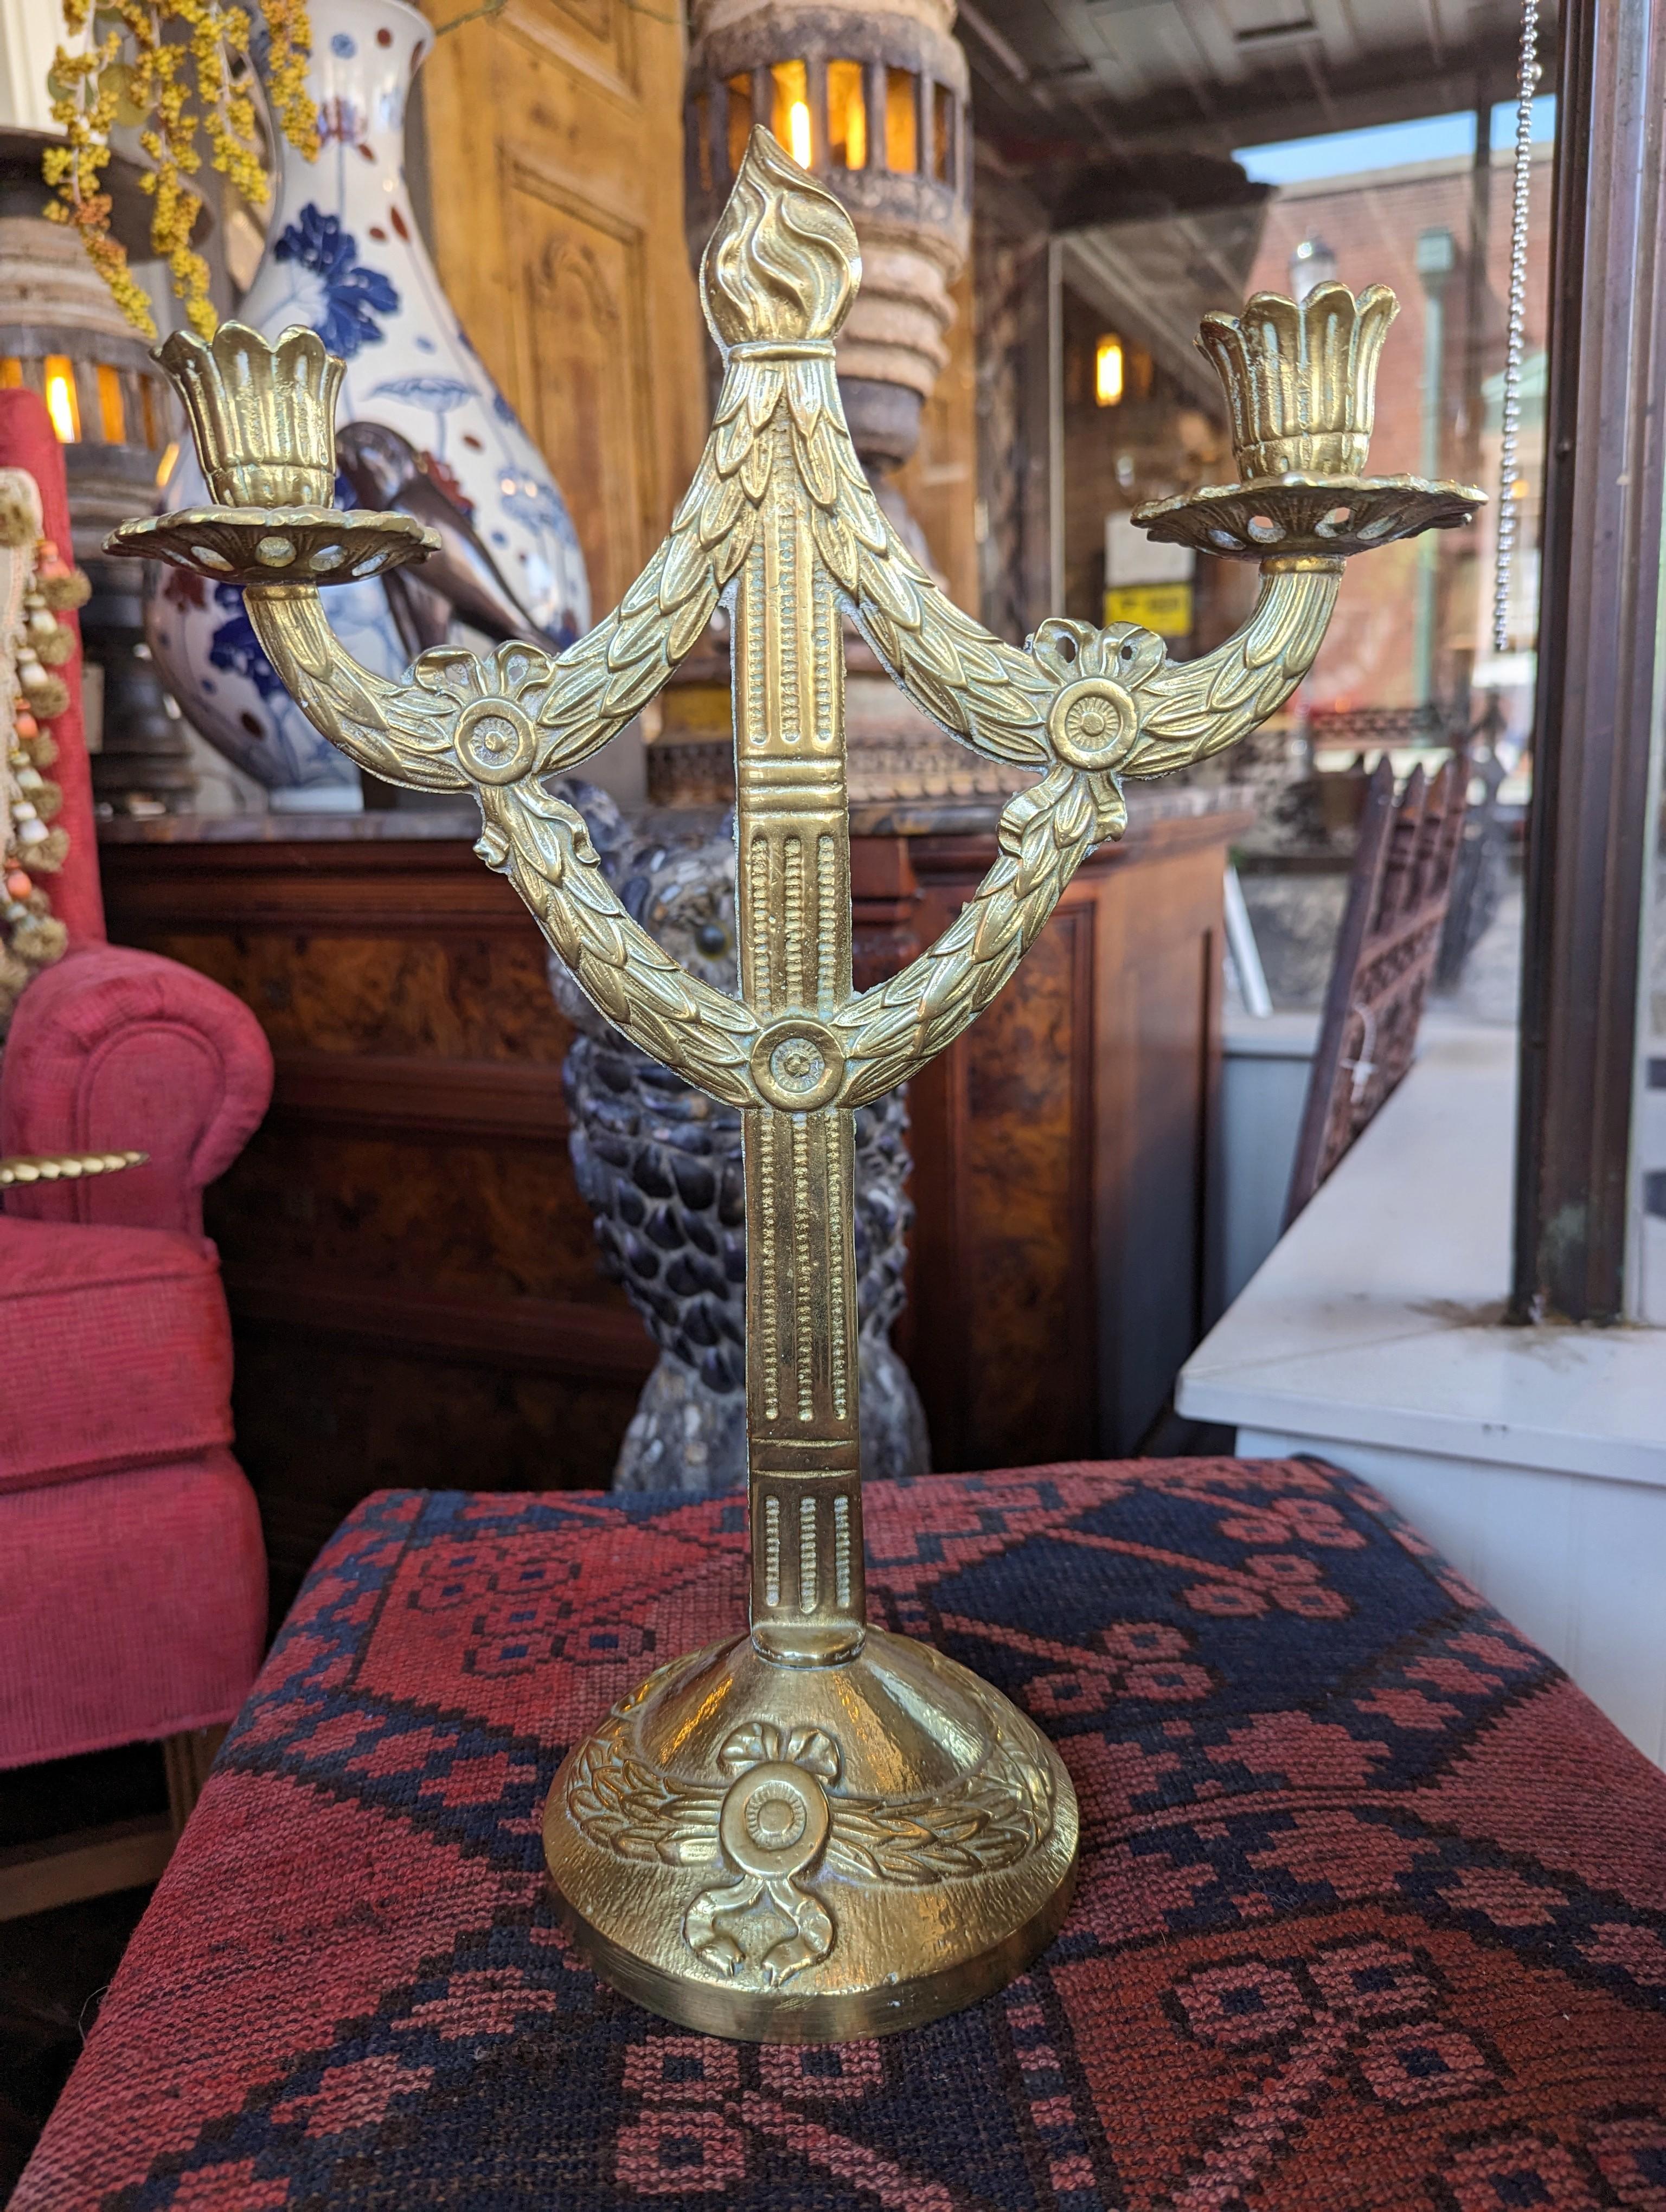 Elegant and detailed antique brass candelabra with a classical ribbon and wreath motif. Fits two candles and has original patina due to age, measures 15.5 inches in height by 11 inches in width.